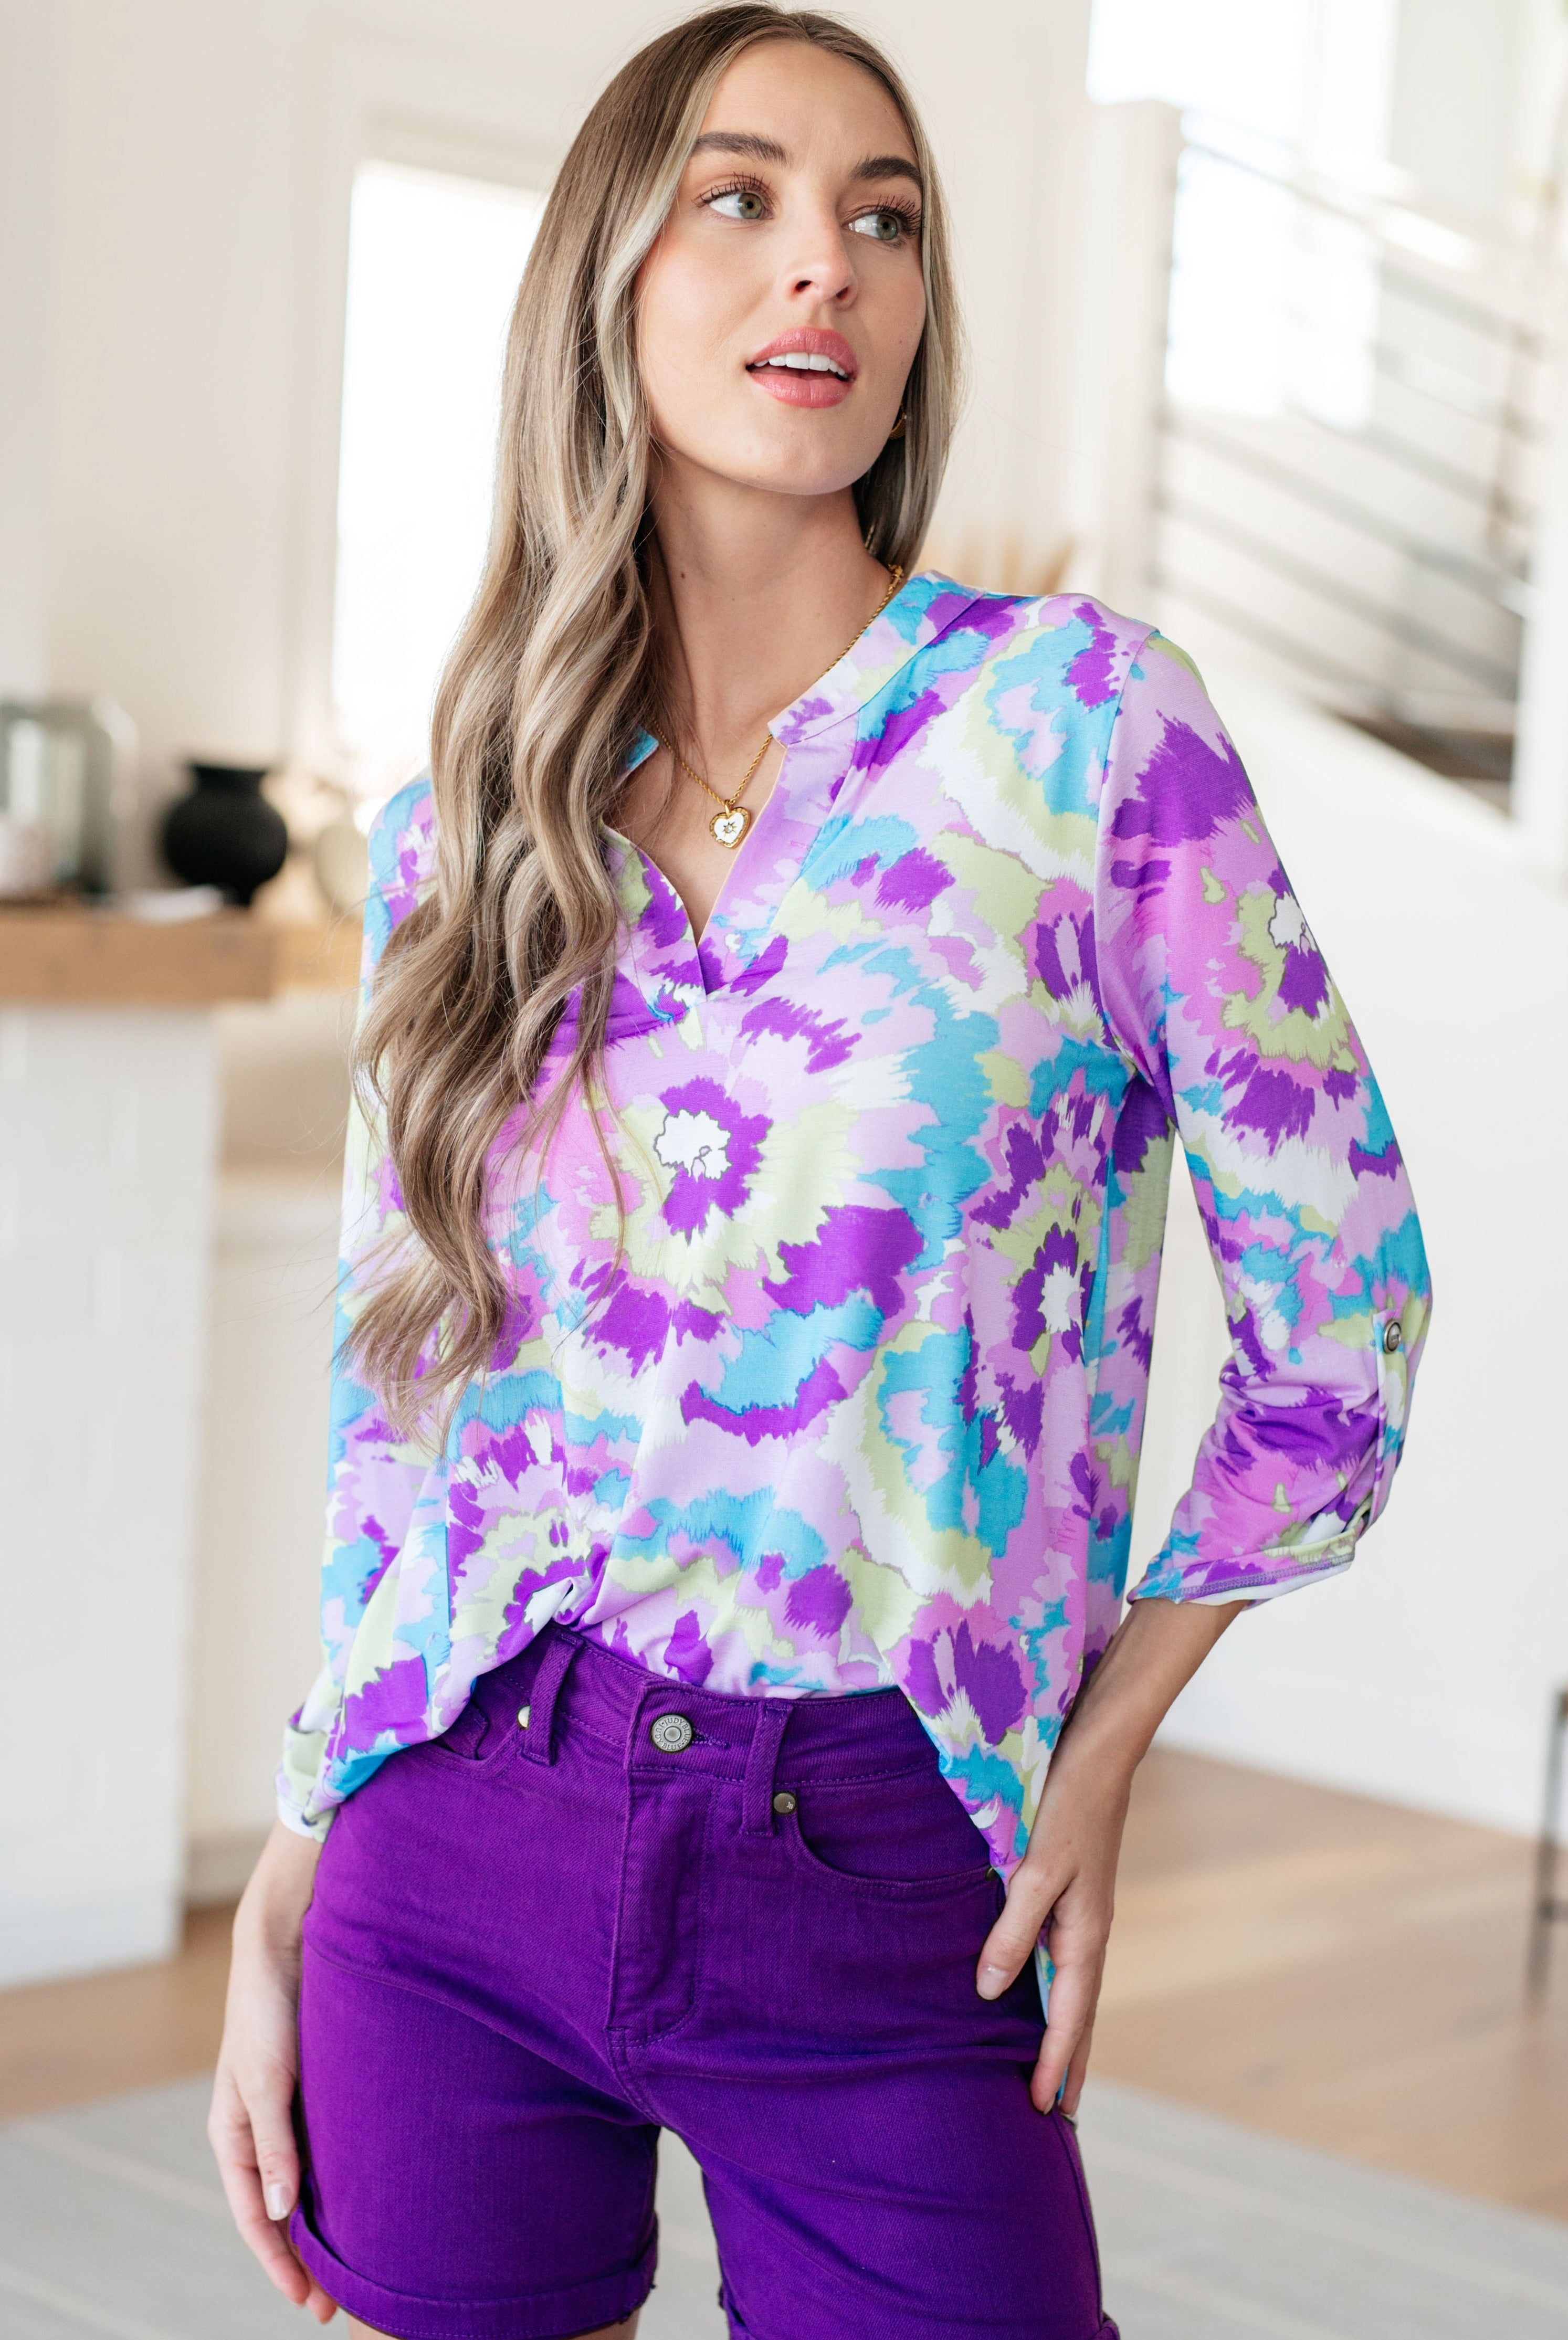 Lizzy Top in Lavender and Purple Brush Strokes-Long Sleeves-Ave Shops-Urban Threadz Boutique, Women's Fashion Boutique in Saugatuck, MI